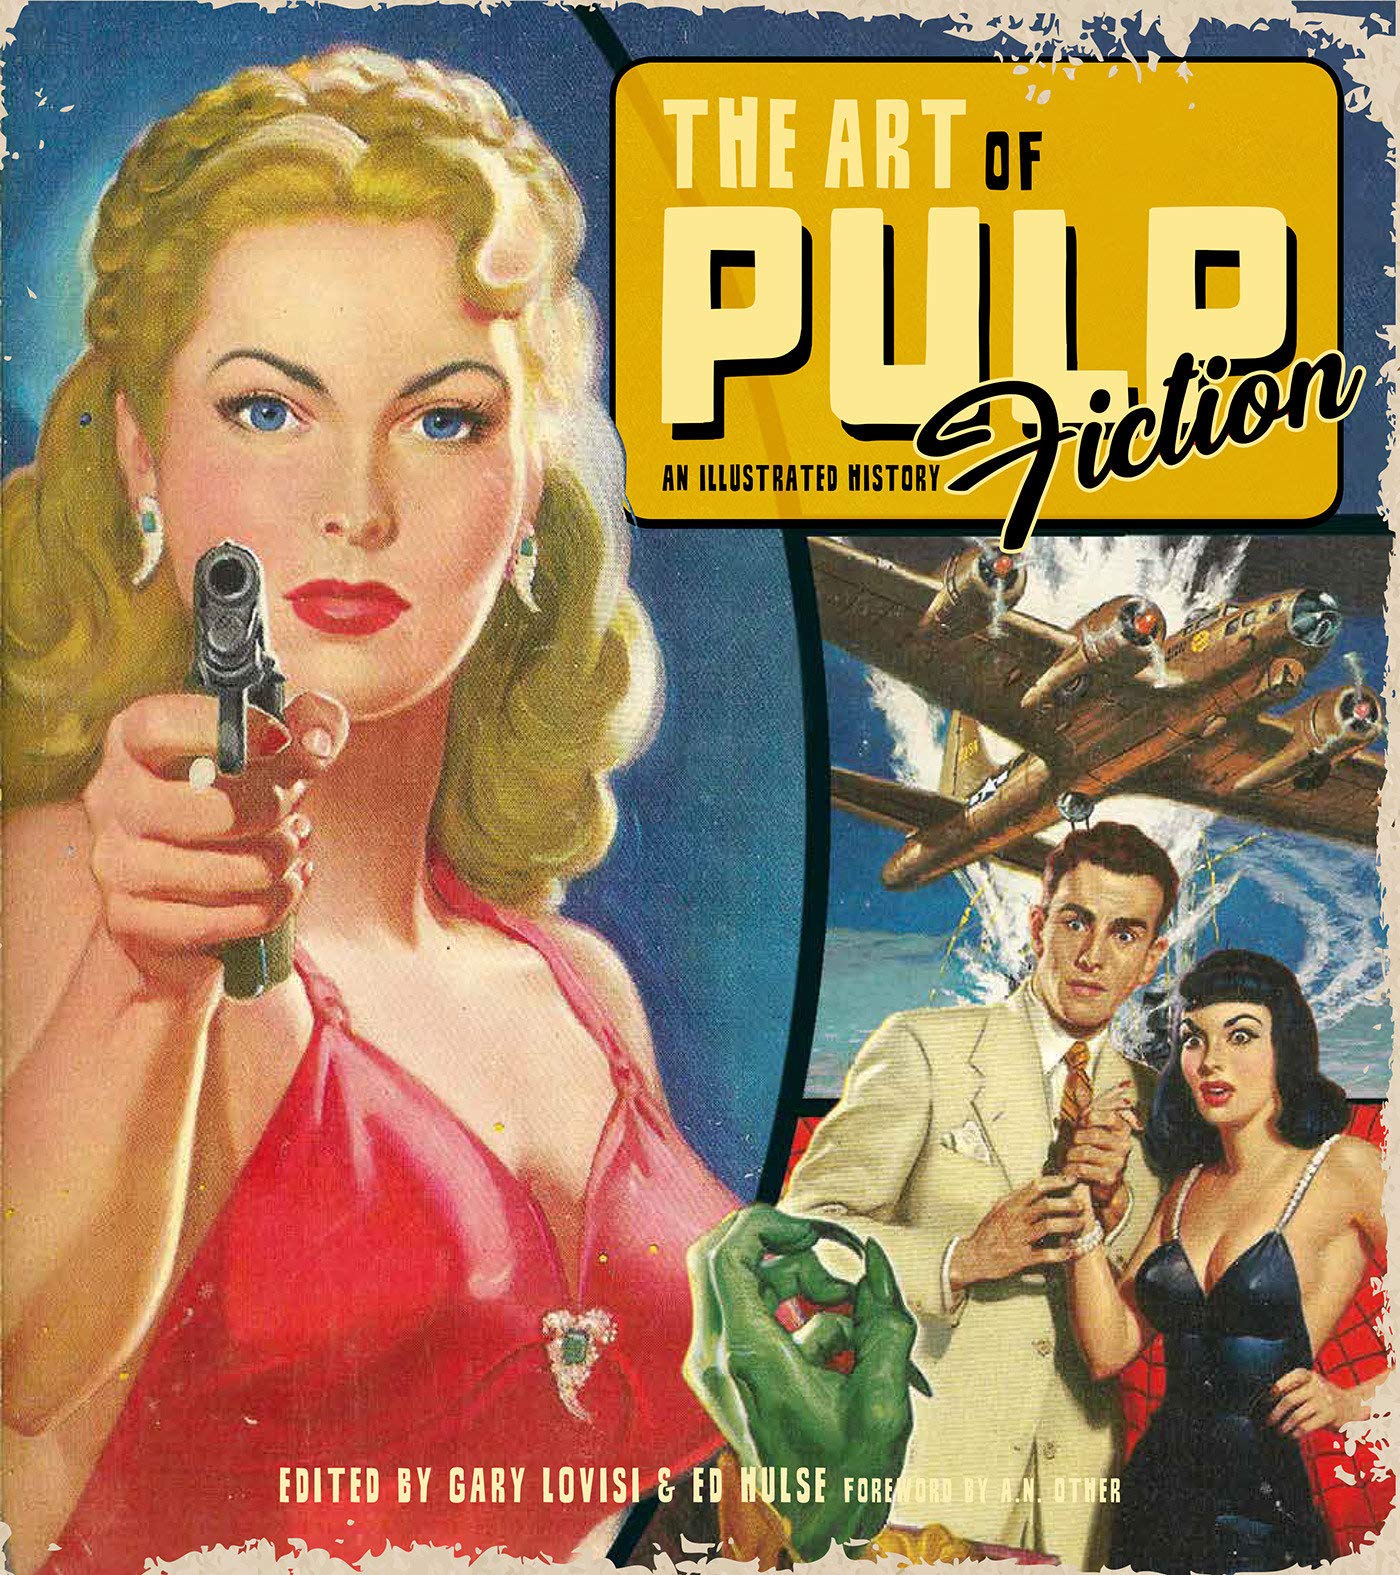 The Art of Pulp Fiction: An Illustrated History of Vintage Paperbacks (AUTOGRAPHED BOOK)